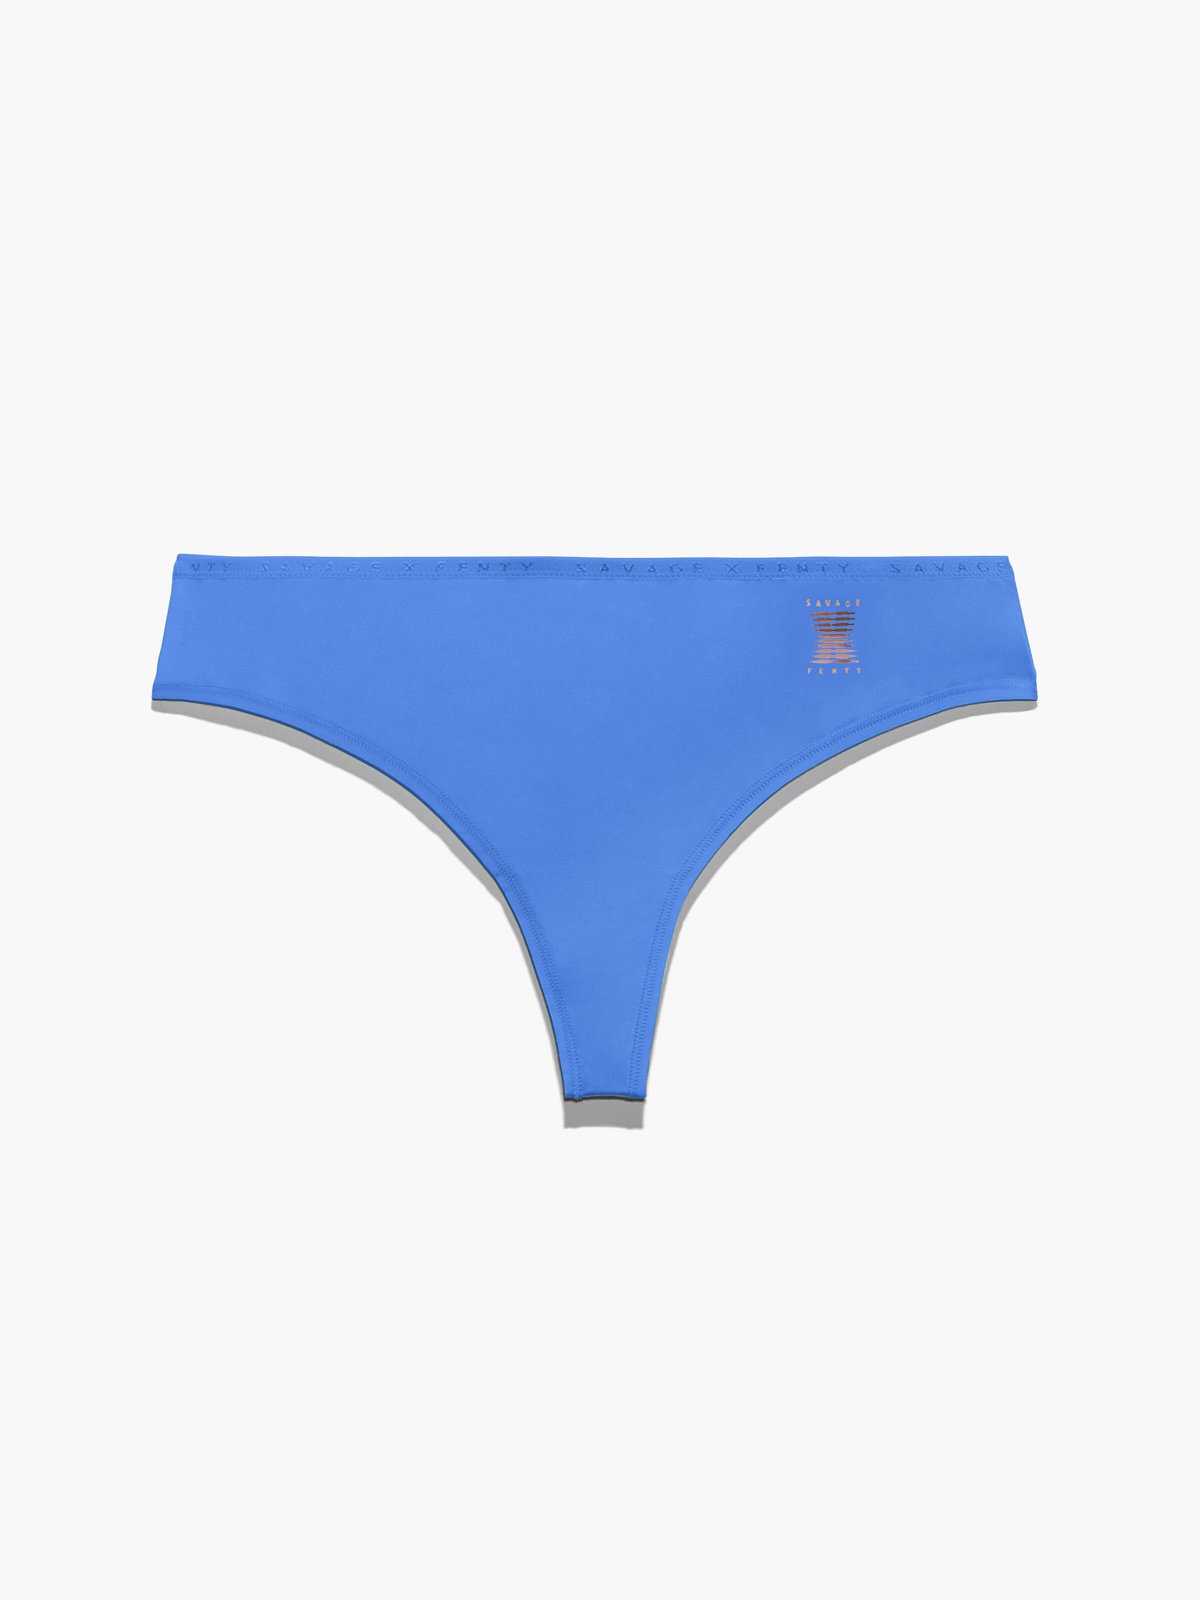 https://cdn.savagex.com/media/images/products/UD2036441-3819/CORE-MICROFIBER-THONG-WITH-LOGO-WAISTBAND-UD2036441-3819-LAYDOWN-1200x1600.jpg